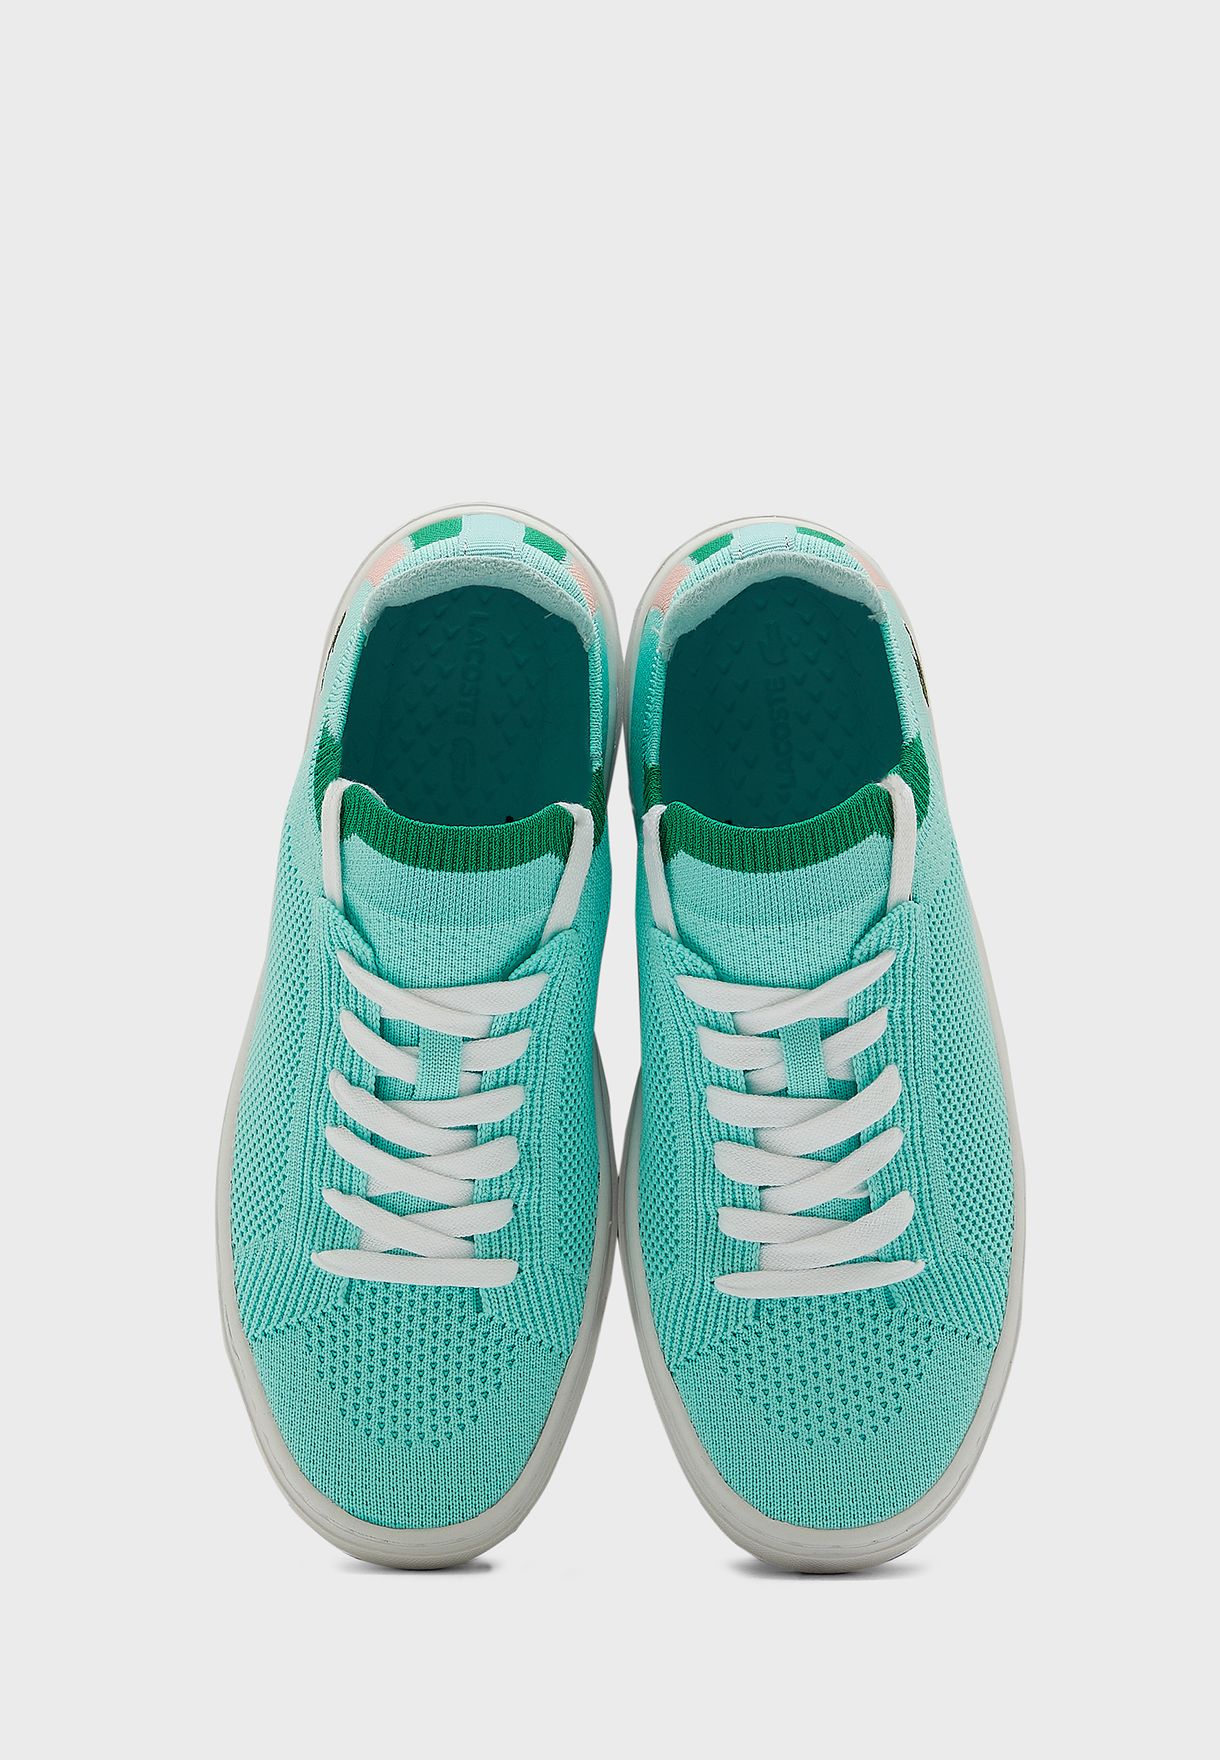 Lace Up Low Top Sneakers